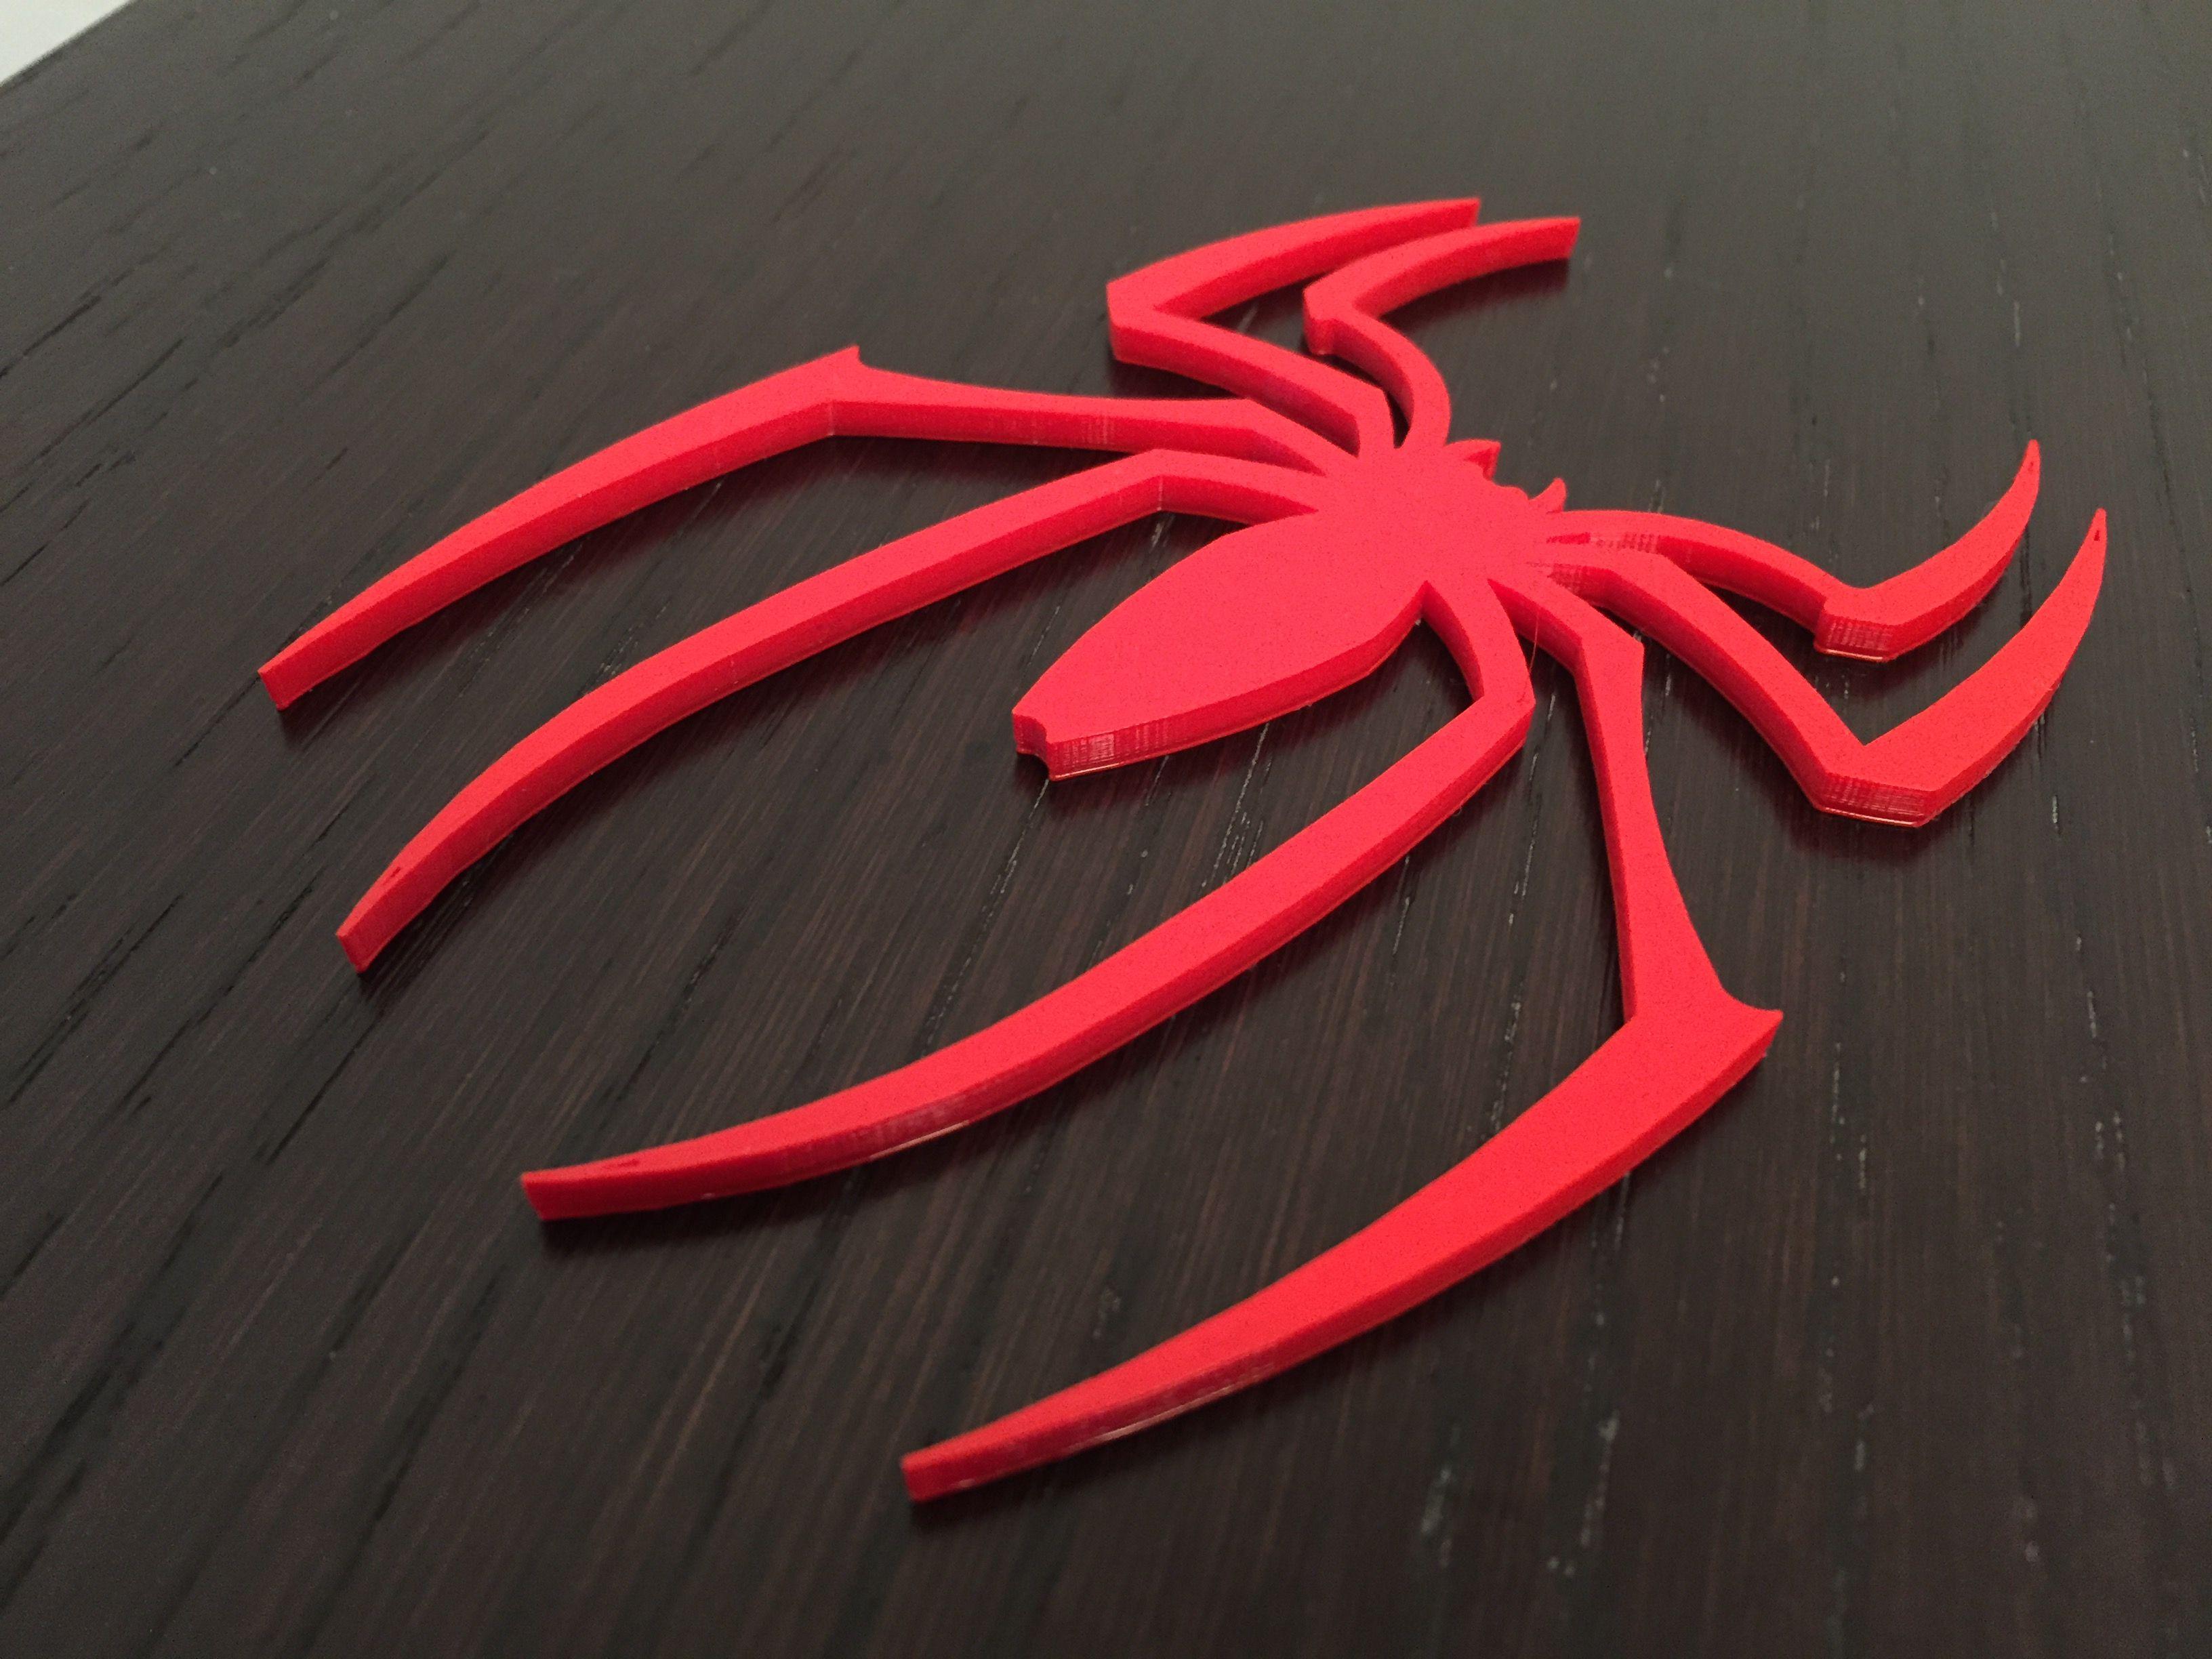 Spider -Man 2 Logo - Marvel - Spiderman logo 2 (Spider Only) by 3D-Smarzy